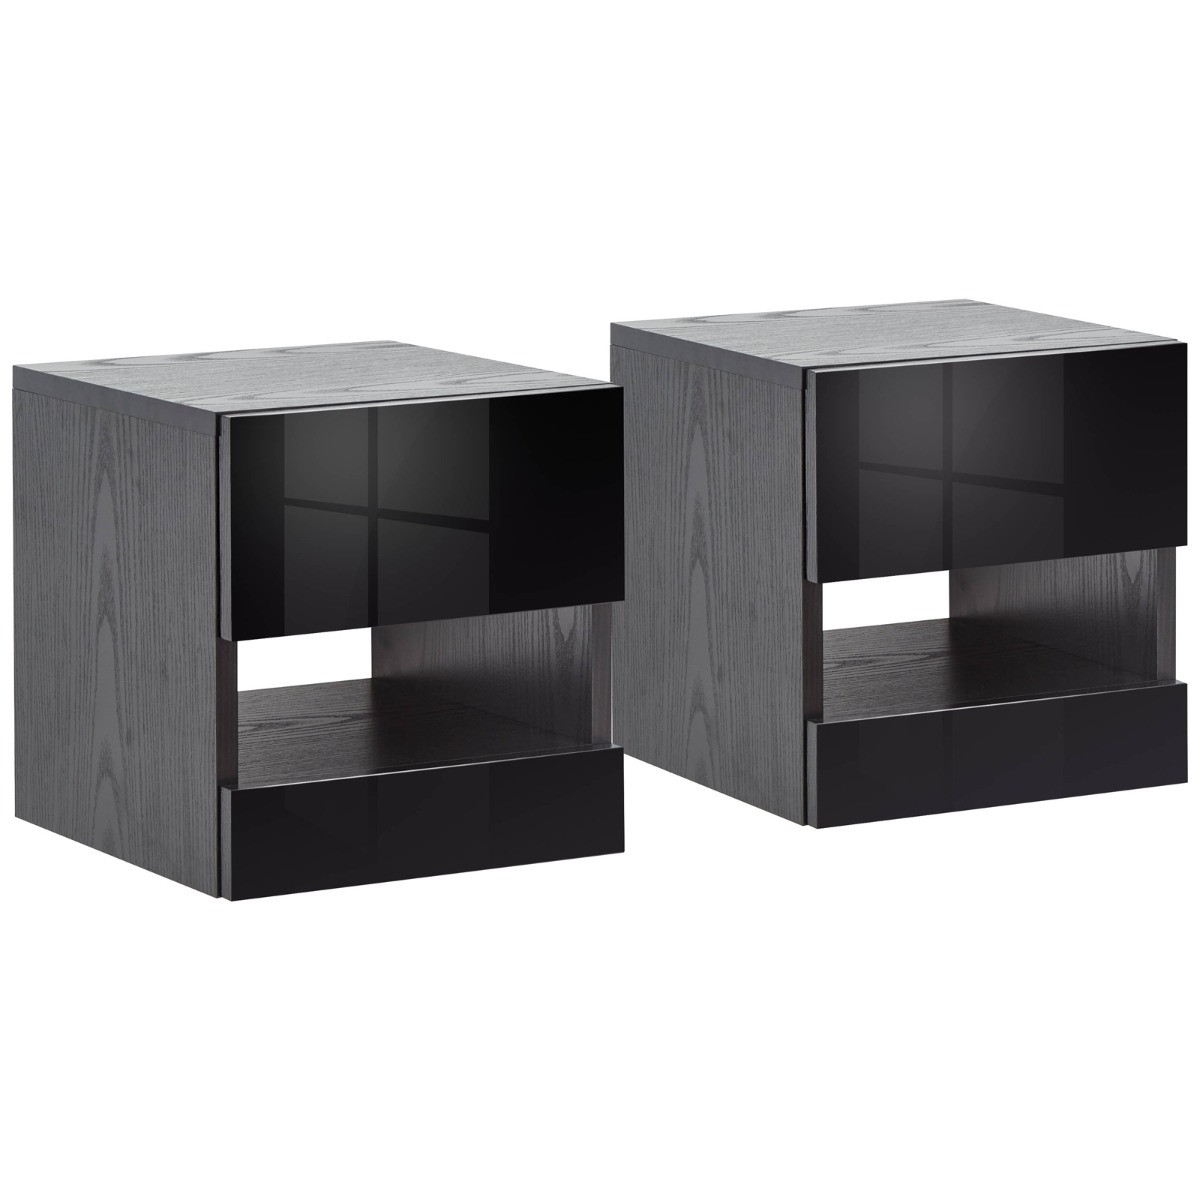 Galicia Pair Of Wall Hanging Bedside Tables - Black>